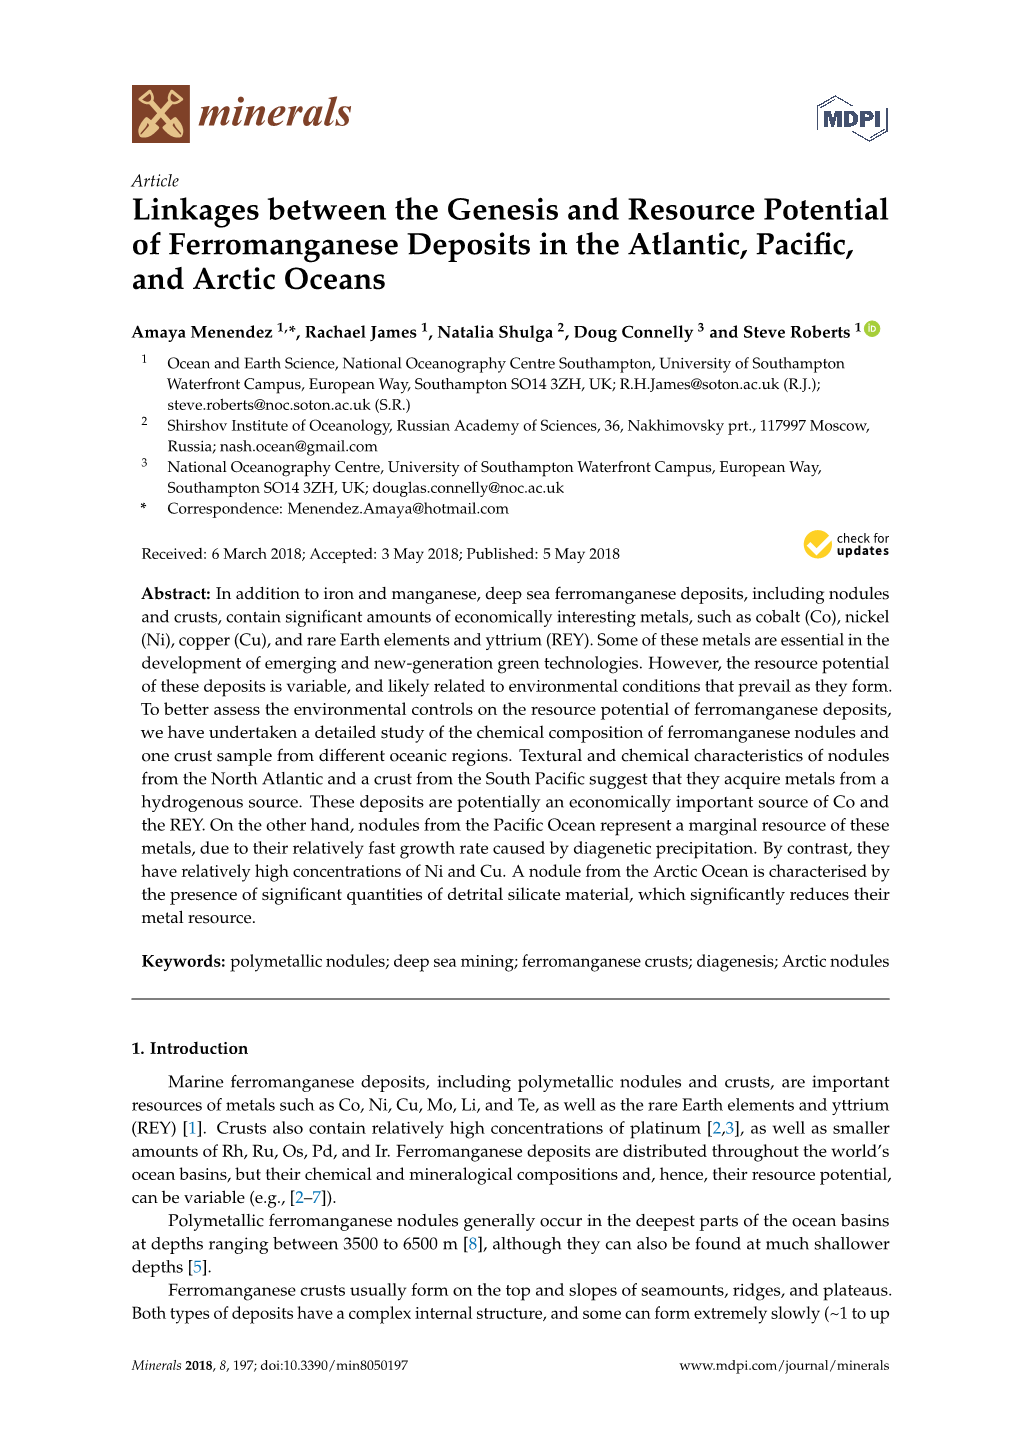 Linkages Between the Genesis and Resource Potential of Ferromanganese Deposits in the Atlantic, Paciﬁc, and Arctic Oceans